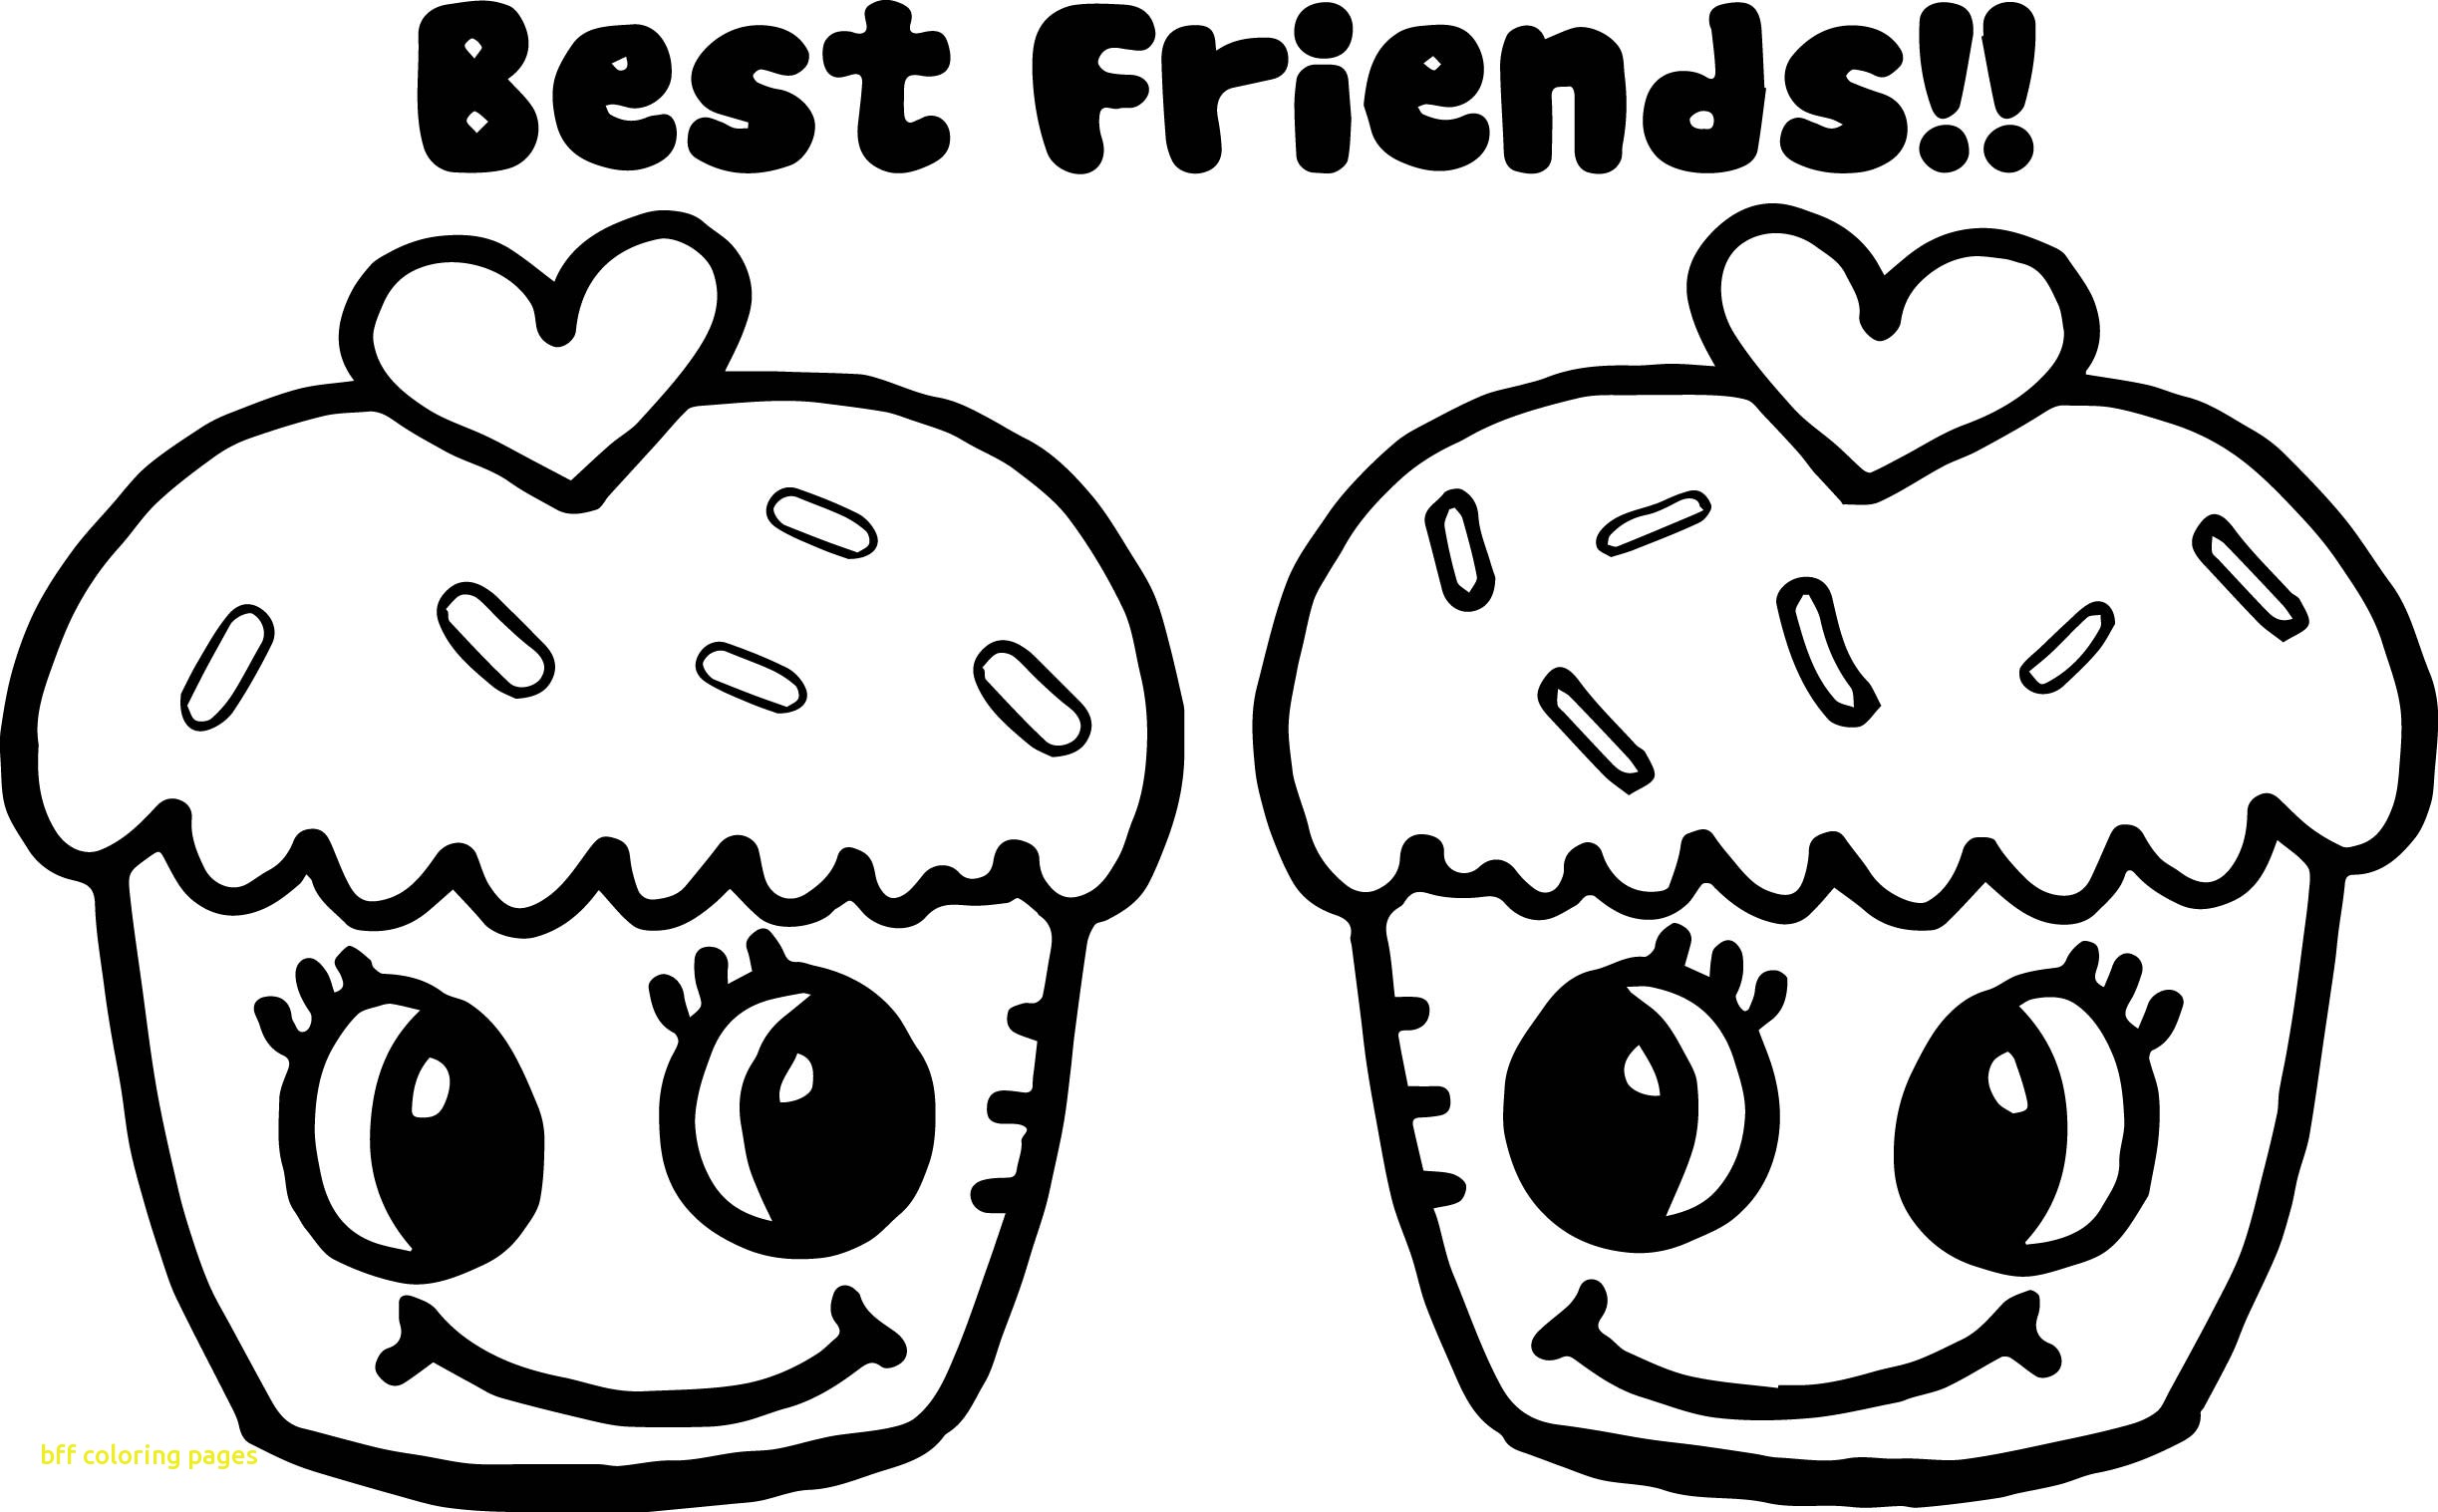 Best Friend Coloring Pages To Print At Getcolorings.com | Free